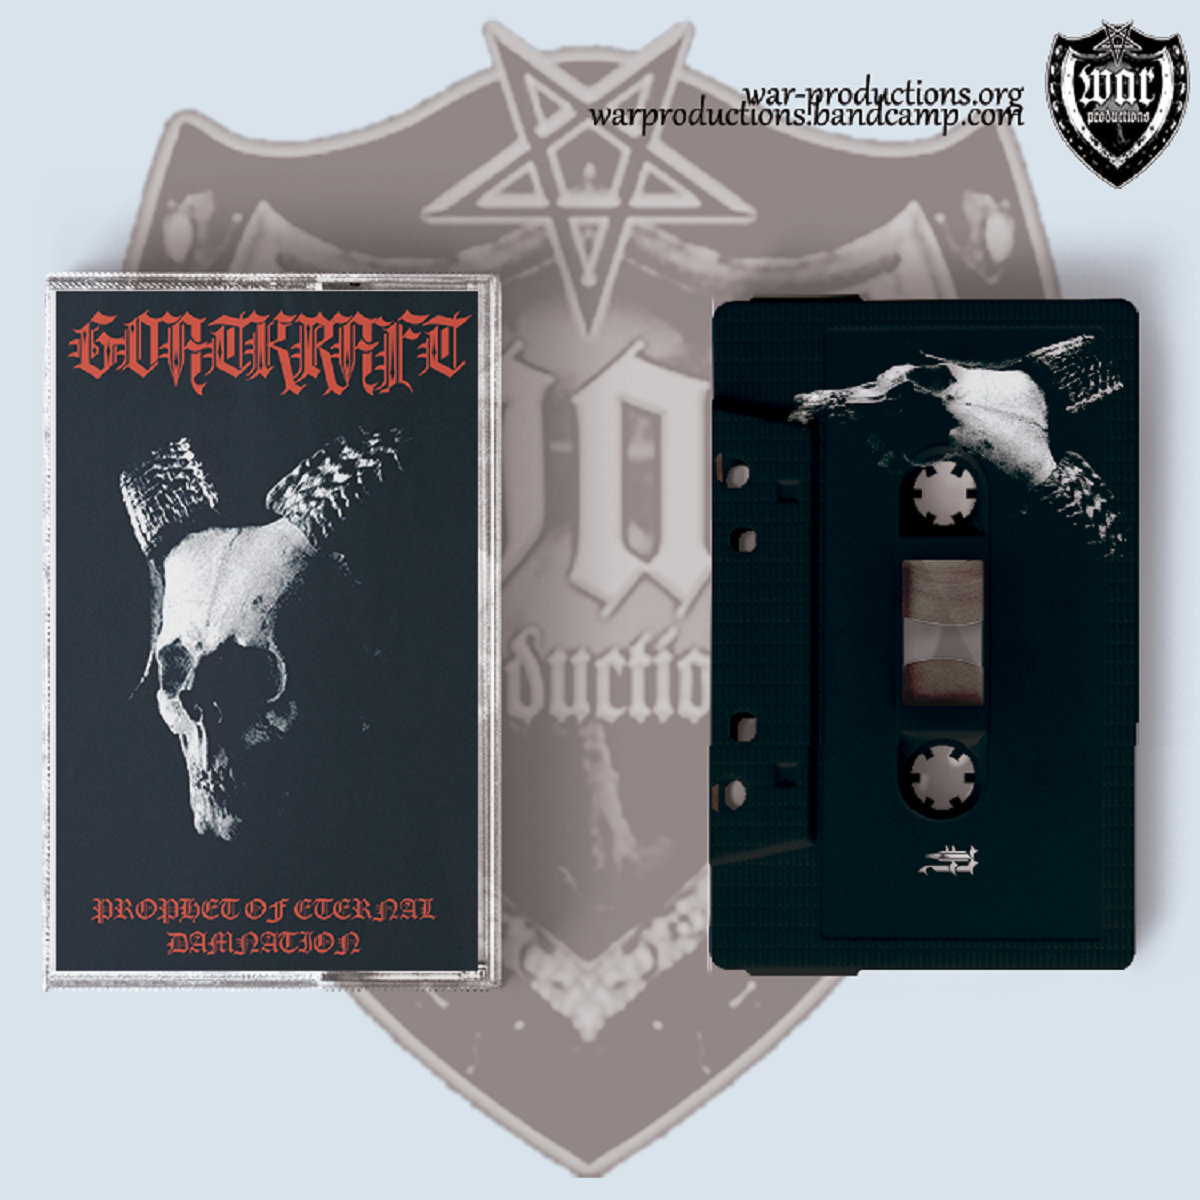 #Goatkraft #News #Preorder
Originally released by the label @BoneheadIron
 in CD and LP format, the tape version finally arrives, which 
@WarProd releases with great honour

warproductions.bandcamp.com/album/wpt099

#WarProductions
#SupportTheUnderground
#BlackDeathMetal
#BlackDeathMetalTapes